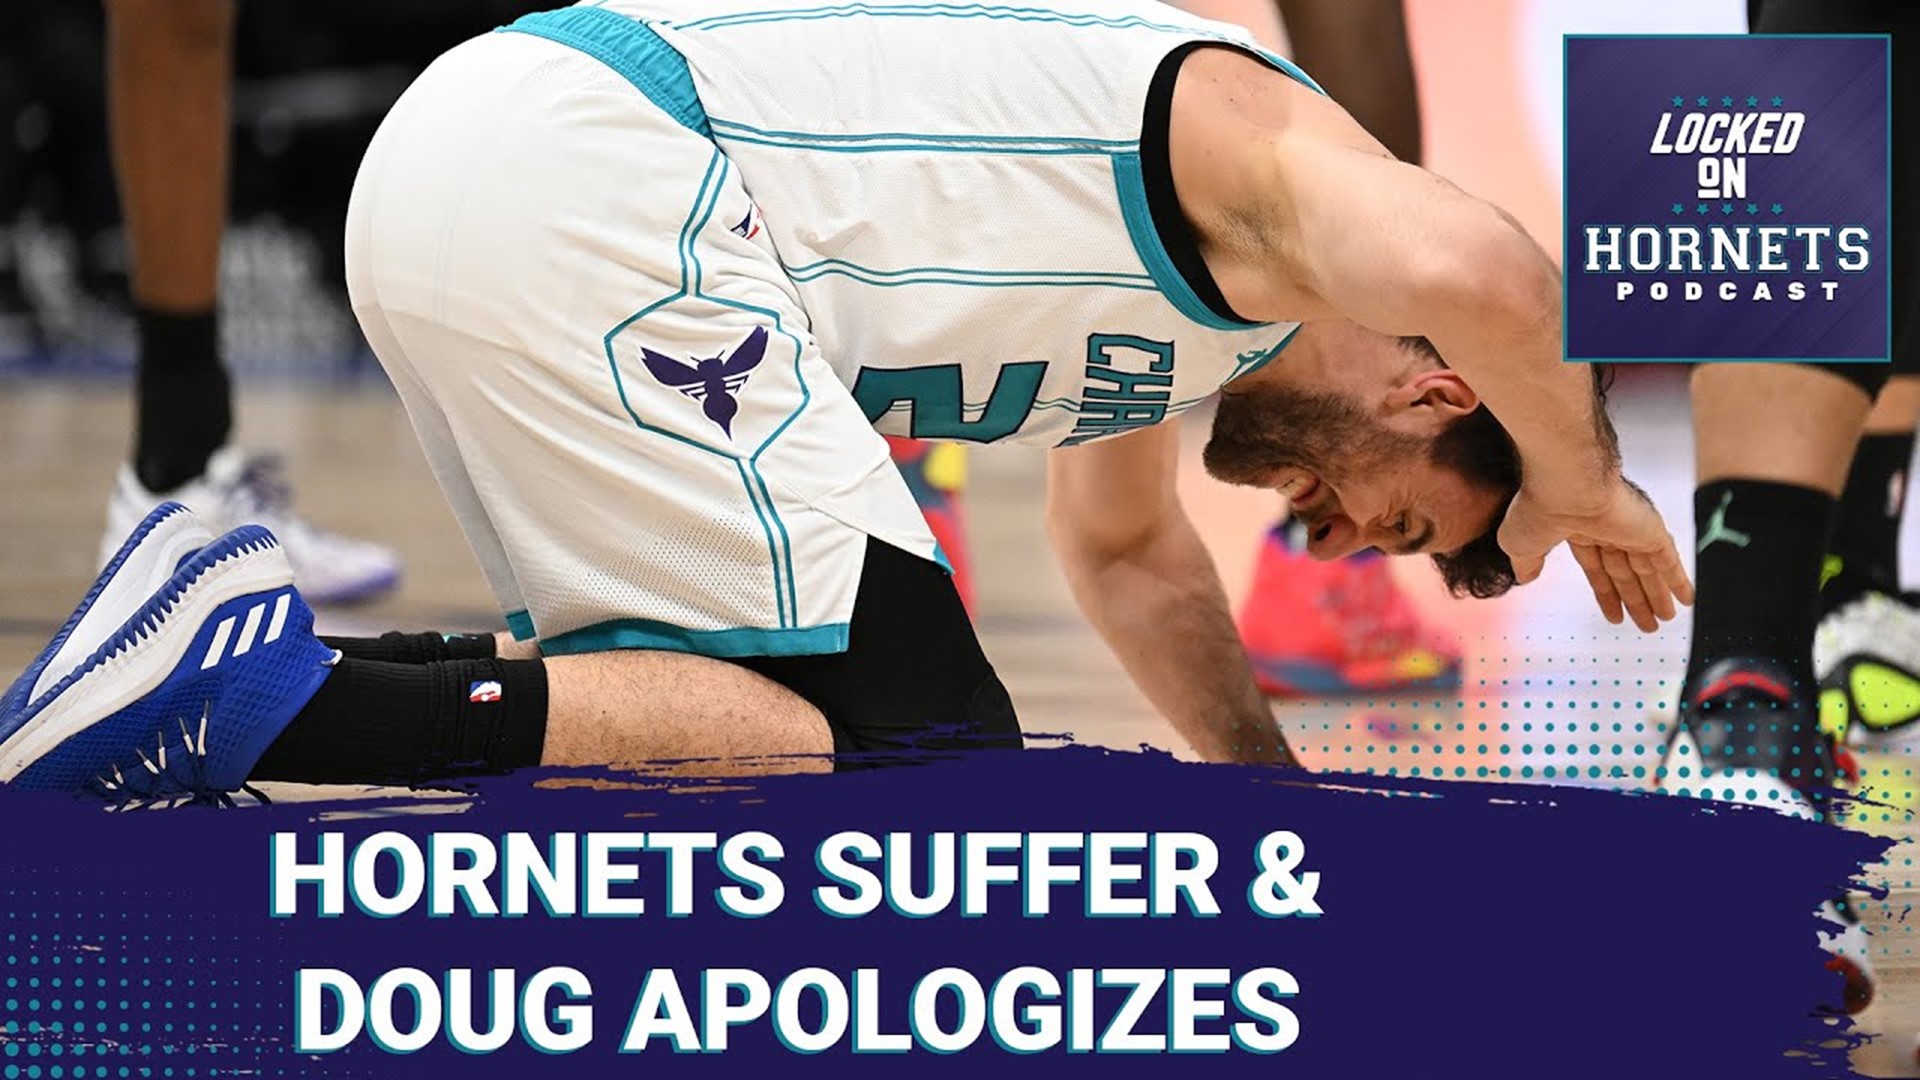 The Charlotte Hornets lose three straight against the Detroit Pistons, Doug apologizes to Serbia